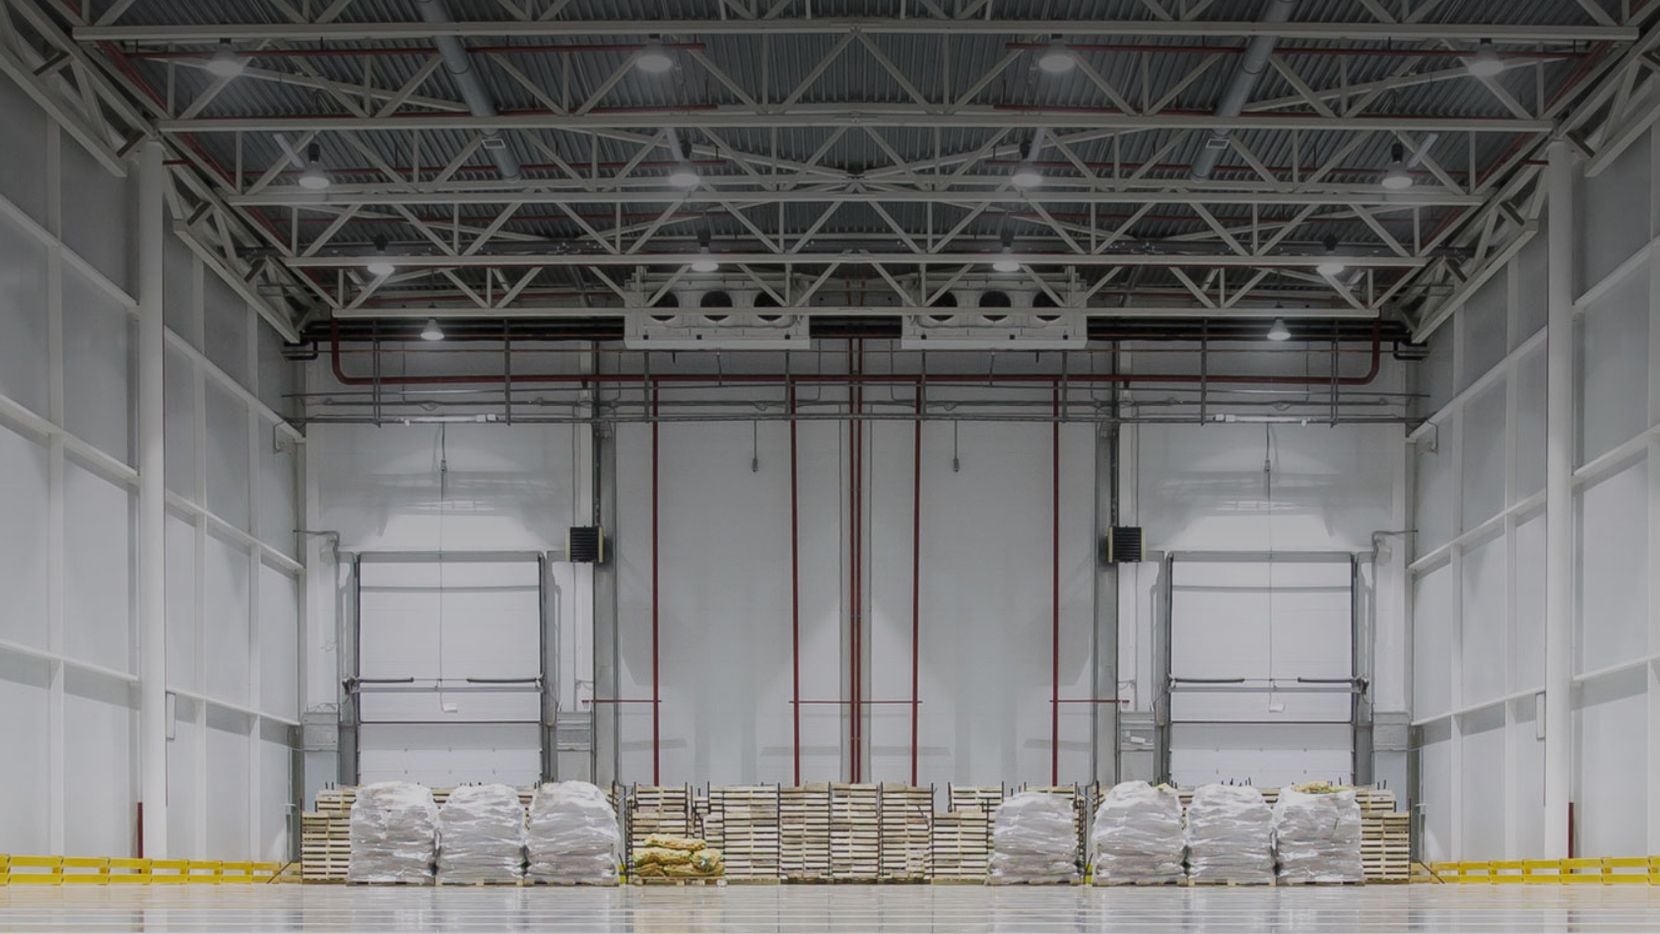 Idaho-based Cold Summit Development builds refrigerated warehouse projects across the country.